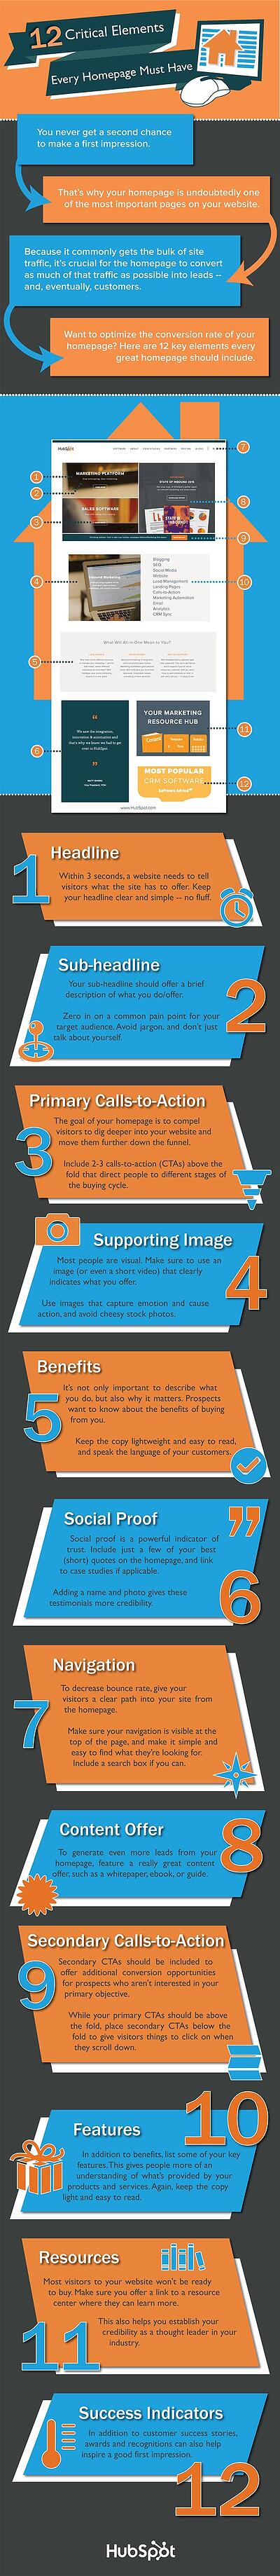 12 critical elements for a website homepage infographic